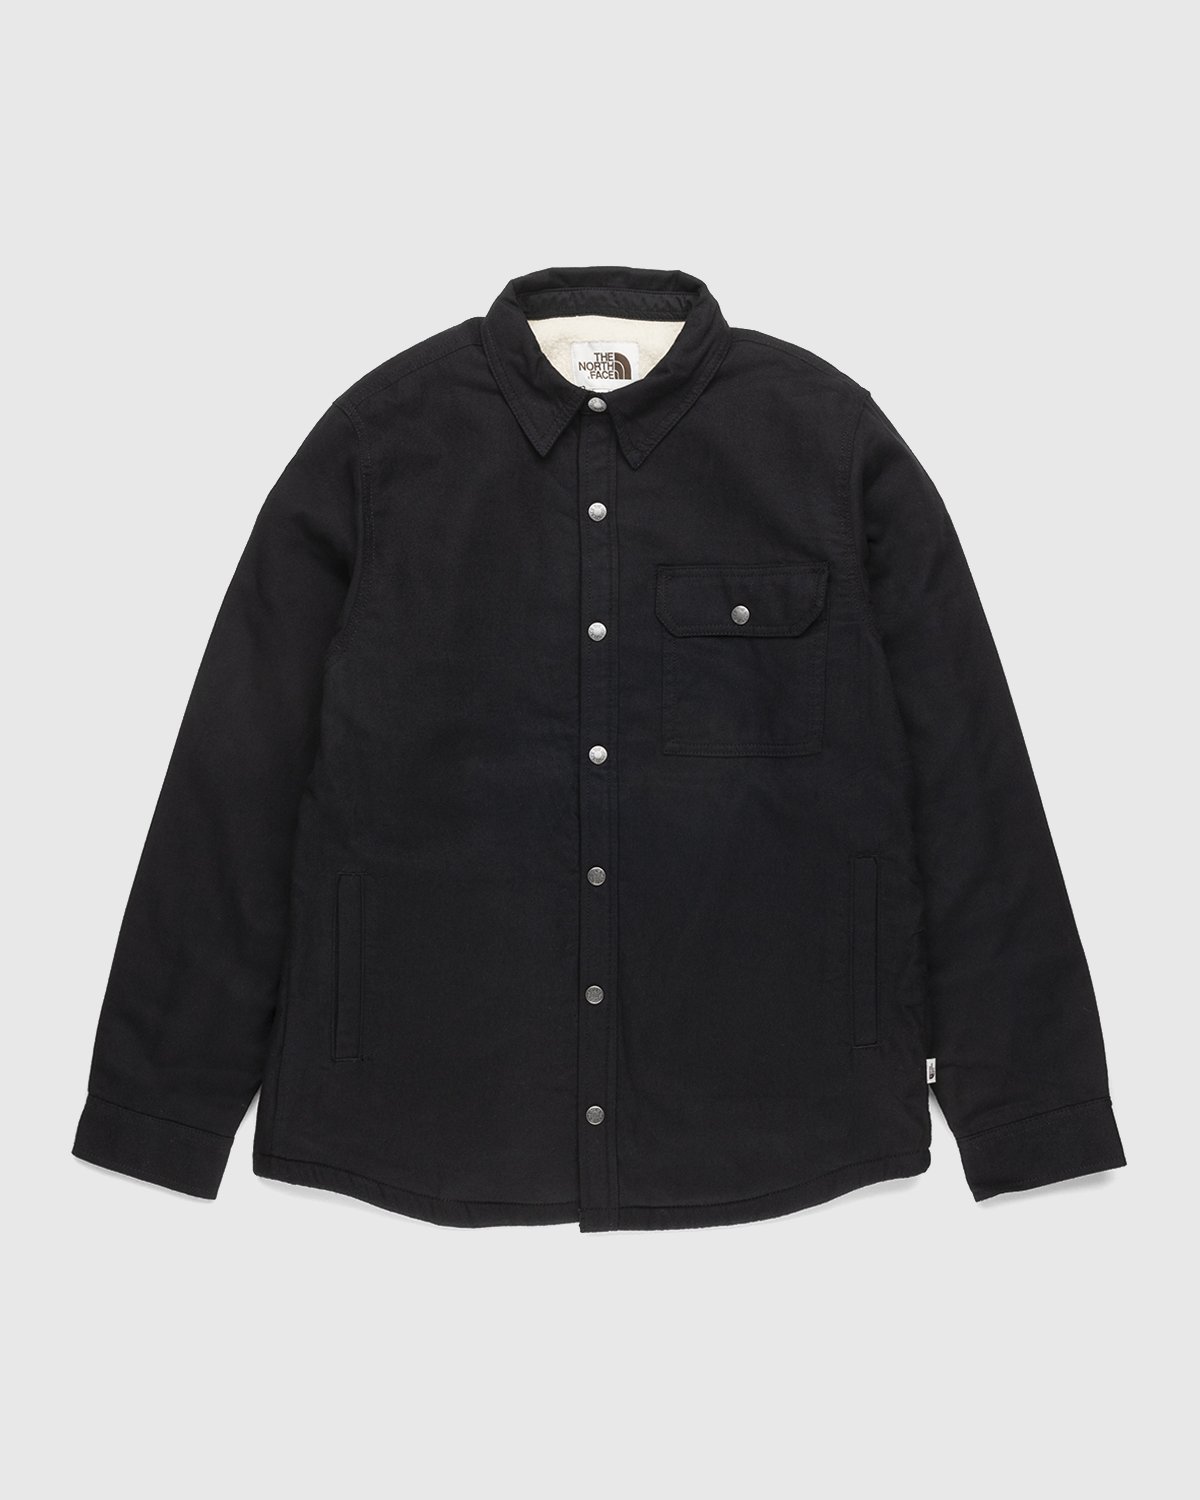 The North Face - Campshire Shirt Black - Clothing - Black - Image 1